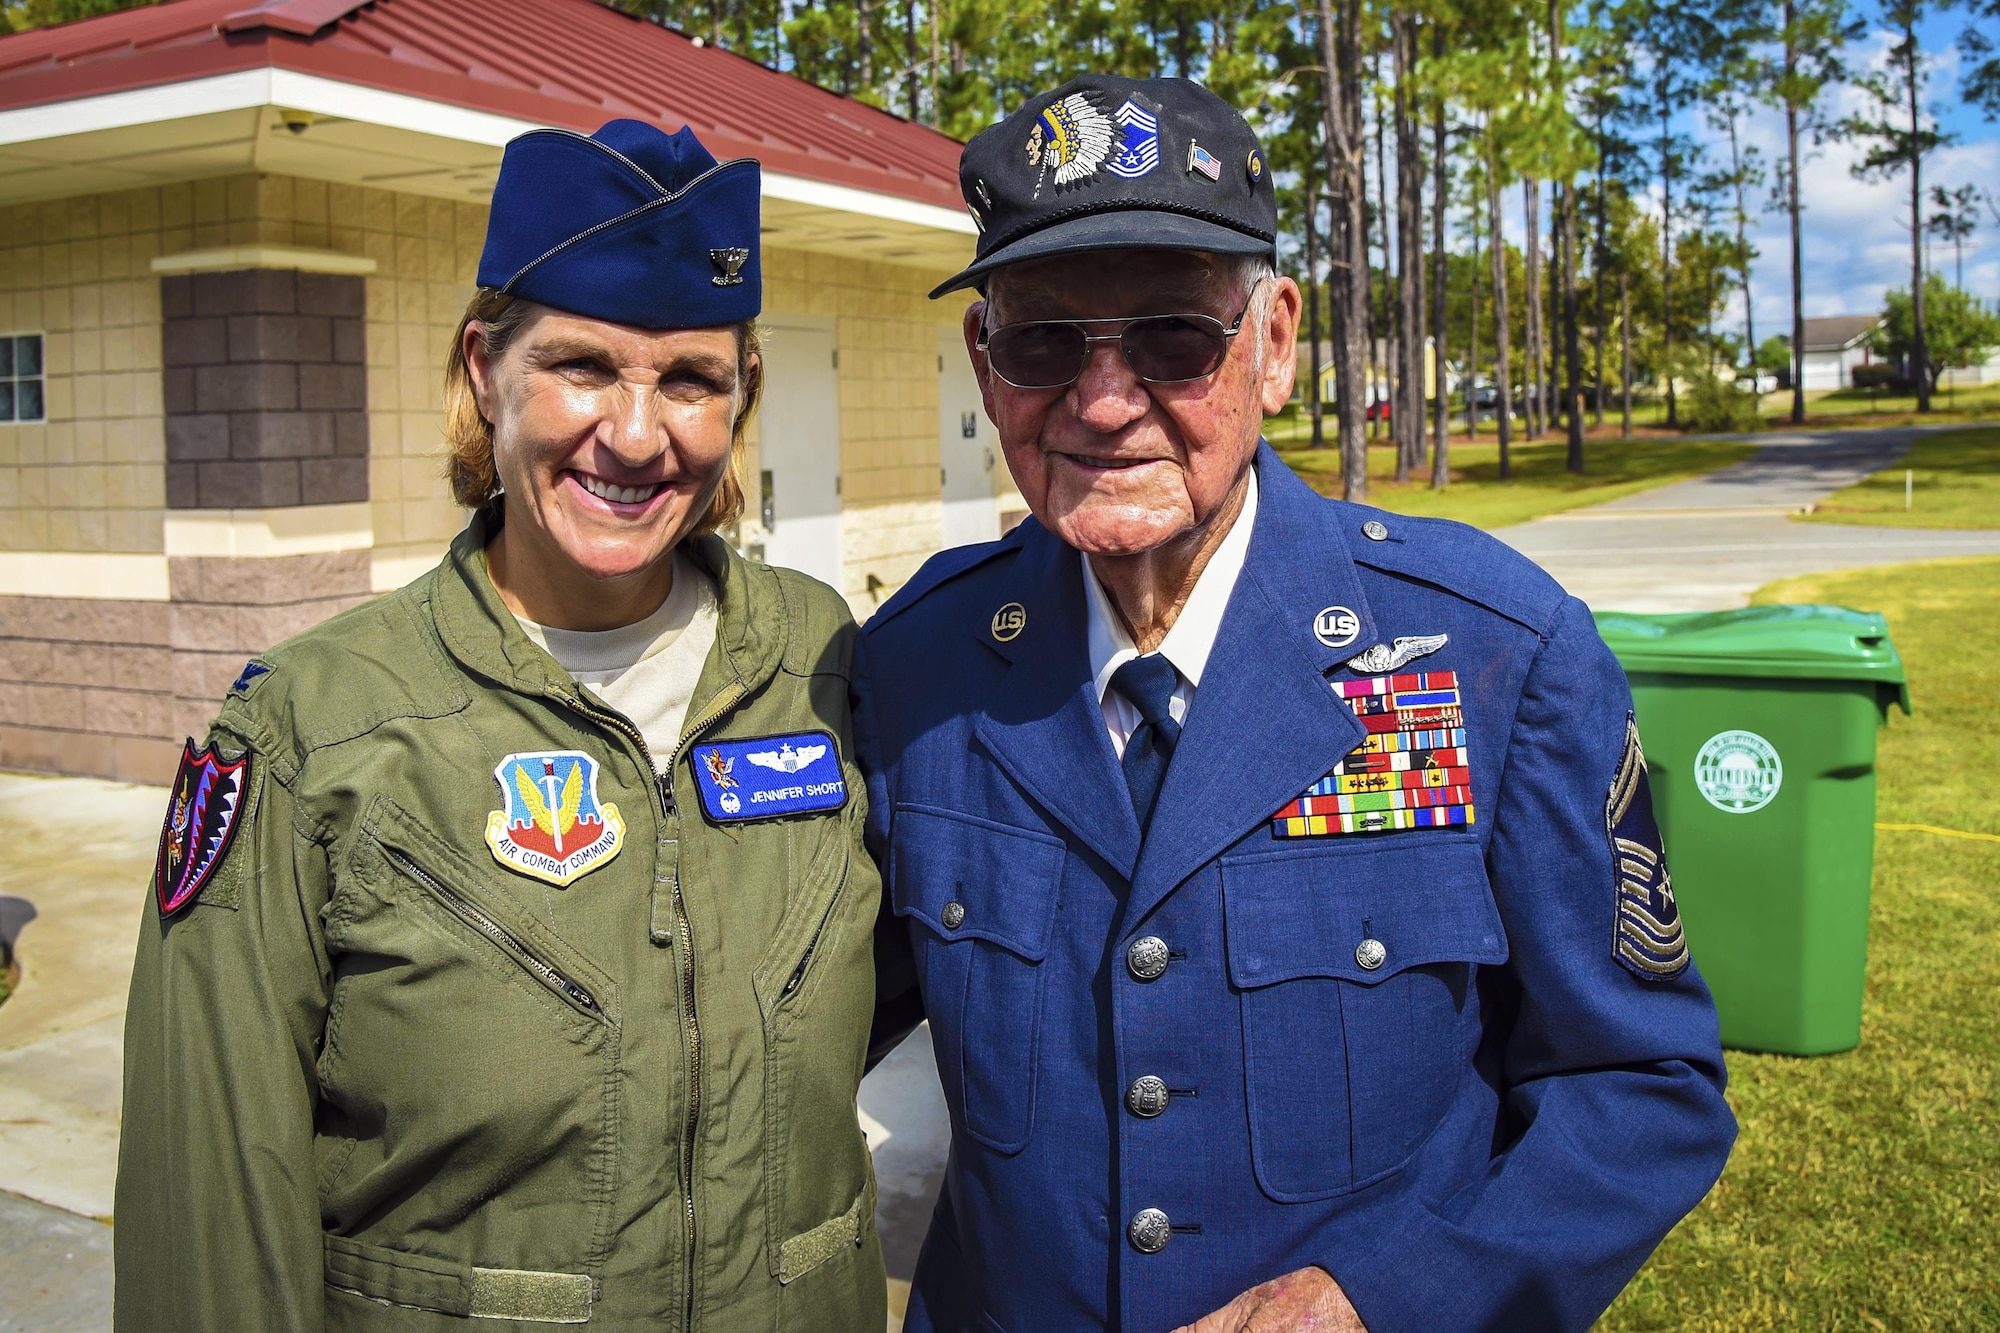 U.S. Air Force Col. Jennifer Short, 23d Wing commander, left, and retired Chief Master Sgt. Jim E. Harring pose for a photo during an U.S. Air Force 70th birthday celebration, Sept. 16, 2017, in Valdosta, Ga. Harring was a charter member of the Air Force, who first enlisted in the Army Air Corps on Jan. 8, 1947 and served in the military for over 30 years. (U.S. Air Force photo by Airman Eugene Oliver)